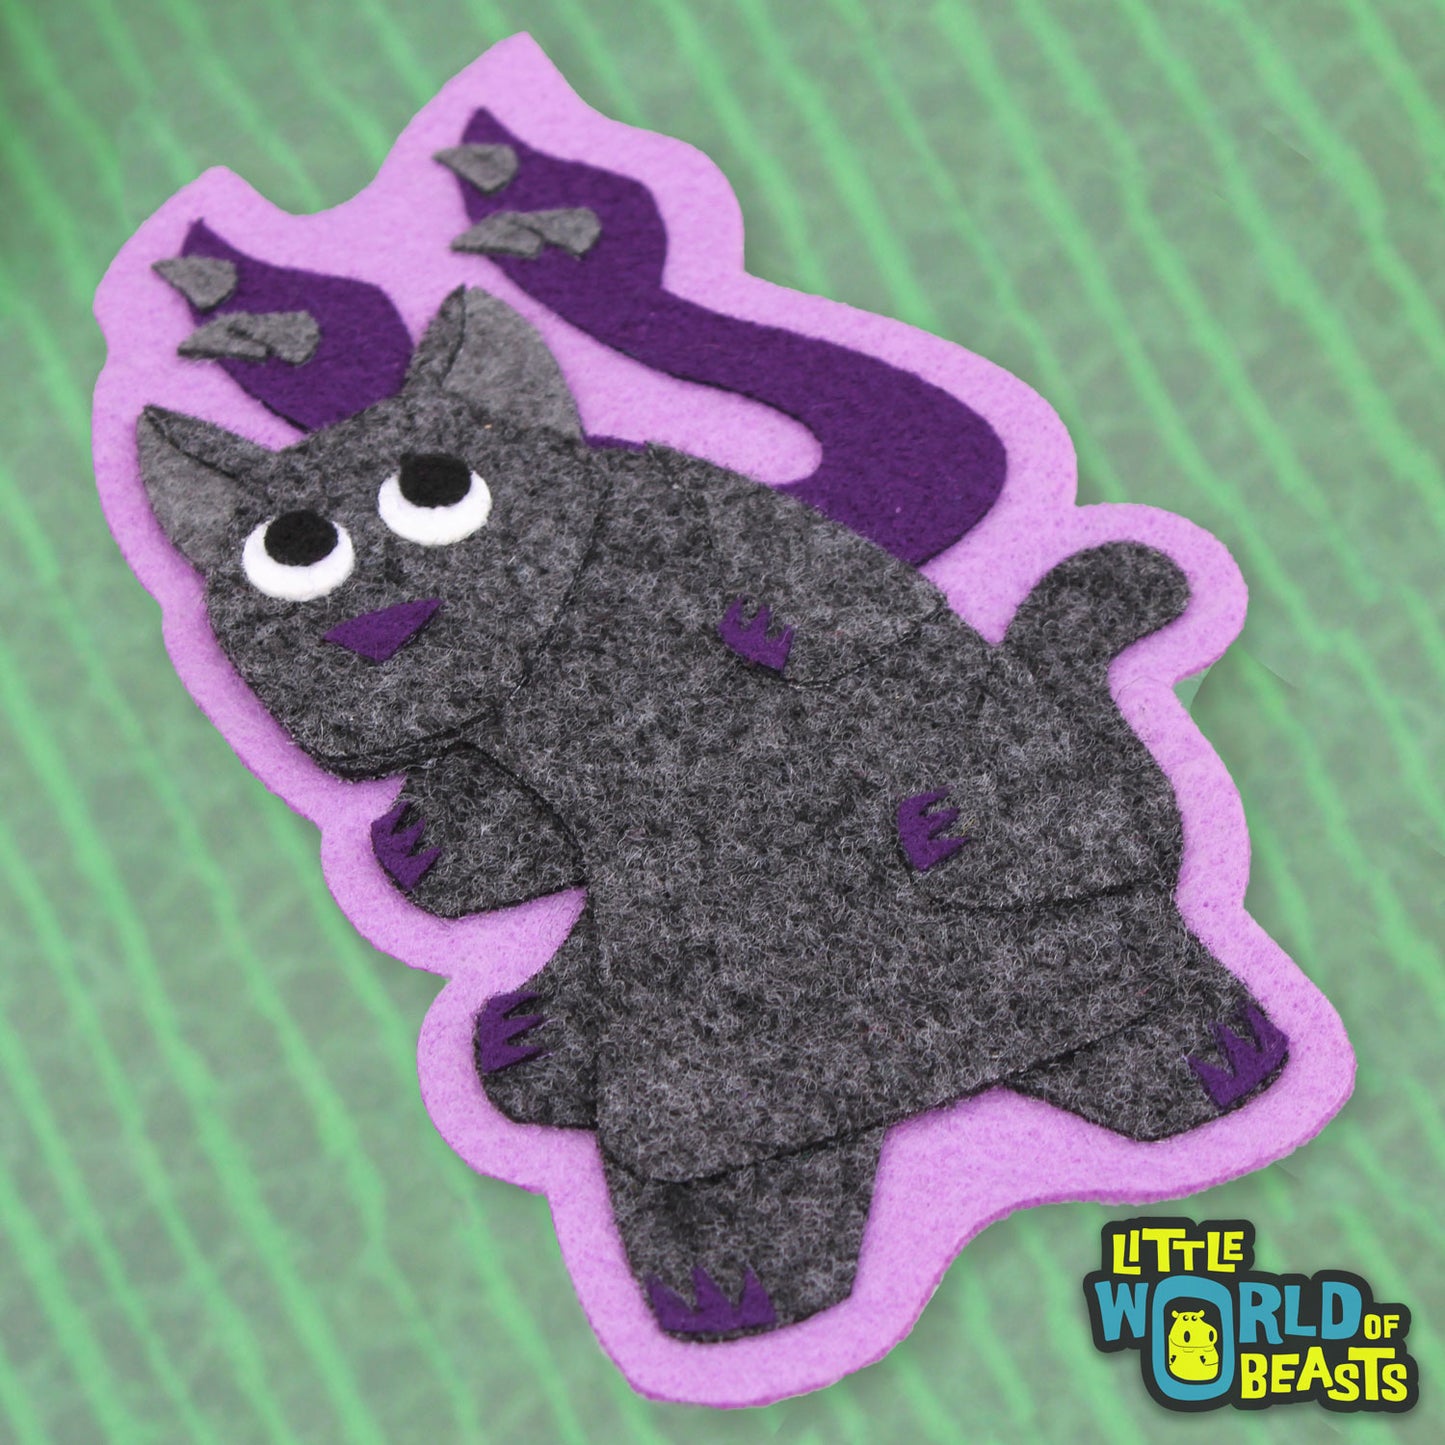 Displacer Beast - Felt Monster Patch Sew On or Iron On Patch